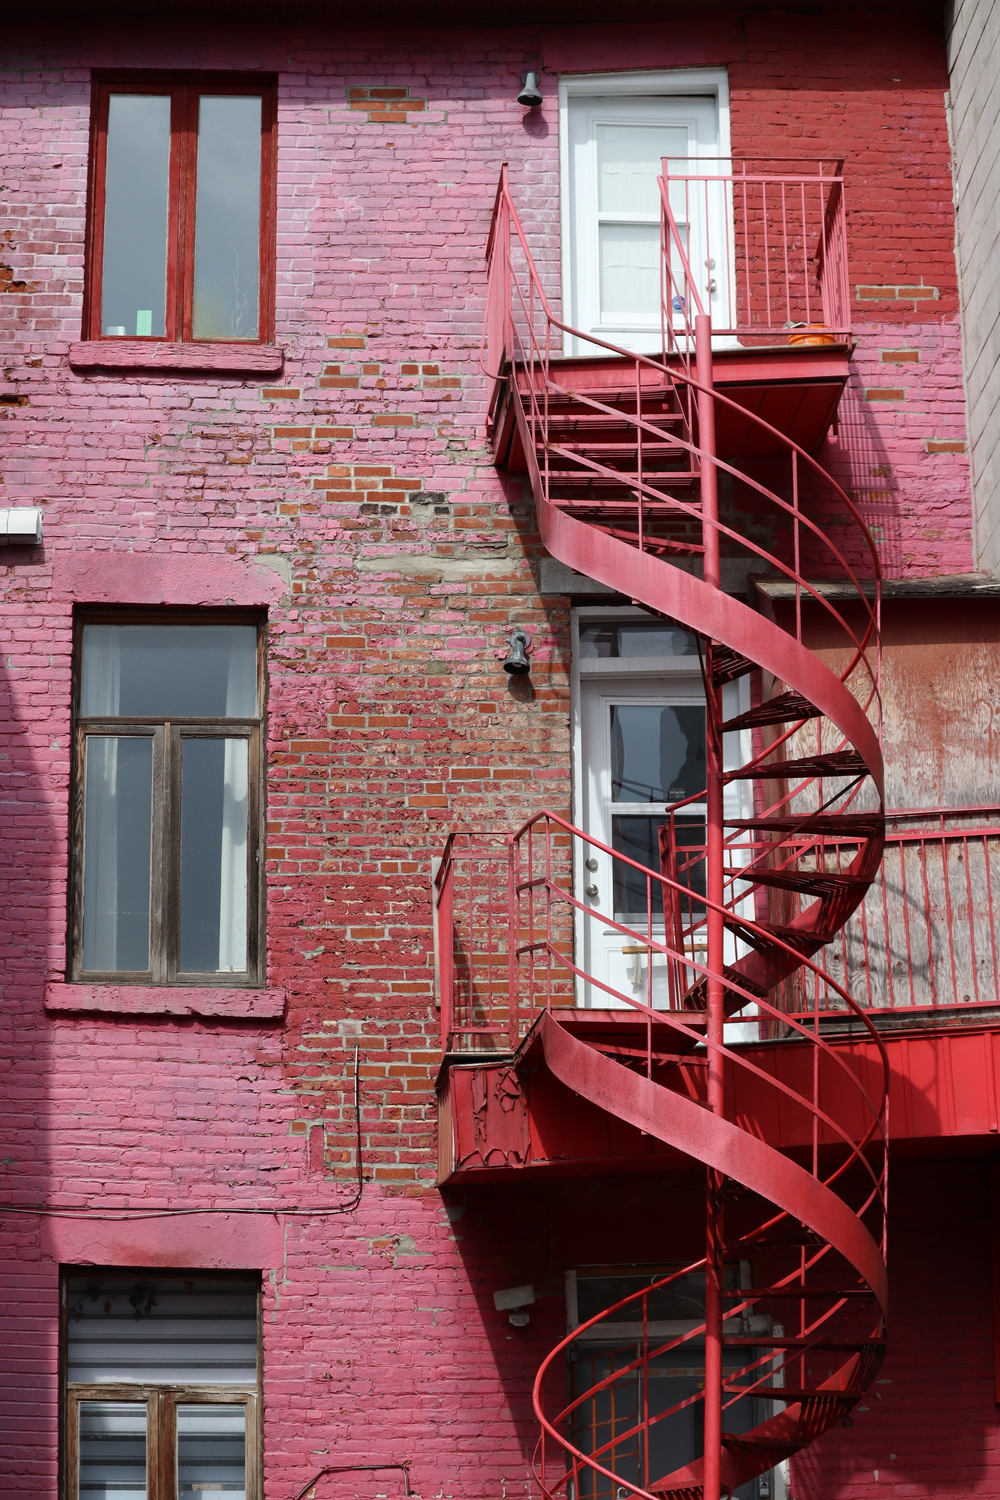 a tall shot of the back of a beautifully coloured building.
the brick wall has been painted a sort of pink,
or at least it's faded to that colour.
there is a splotch in the middle
where the paint has worn off the brick,
along with some stray bricks
elsewhere that have been replaced.
the spiral stairs descending
from the back balconies of two floors
have also been painted red,
but have faded to pink
closer to the top.
everything is a little crooked.
the old wooden-framed windows
on the left,
the more recently replaced doors,
and the balconies.